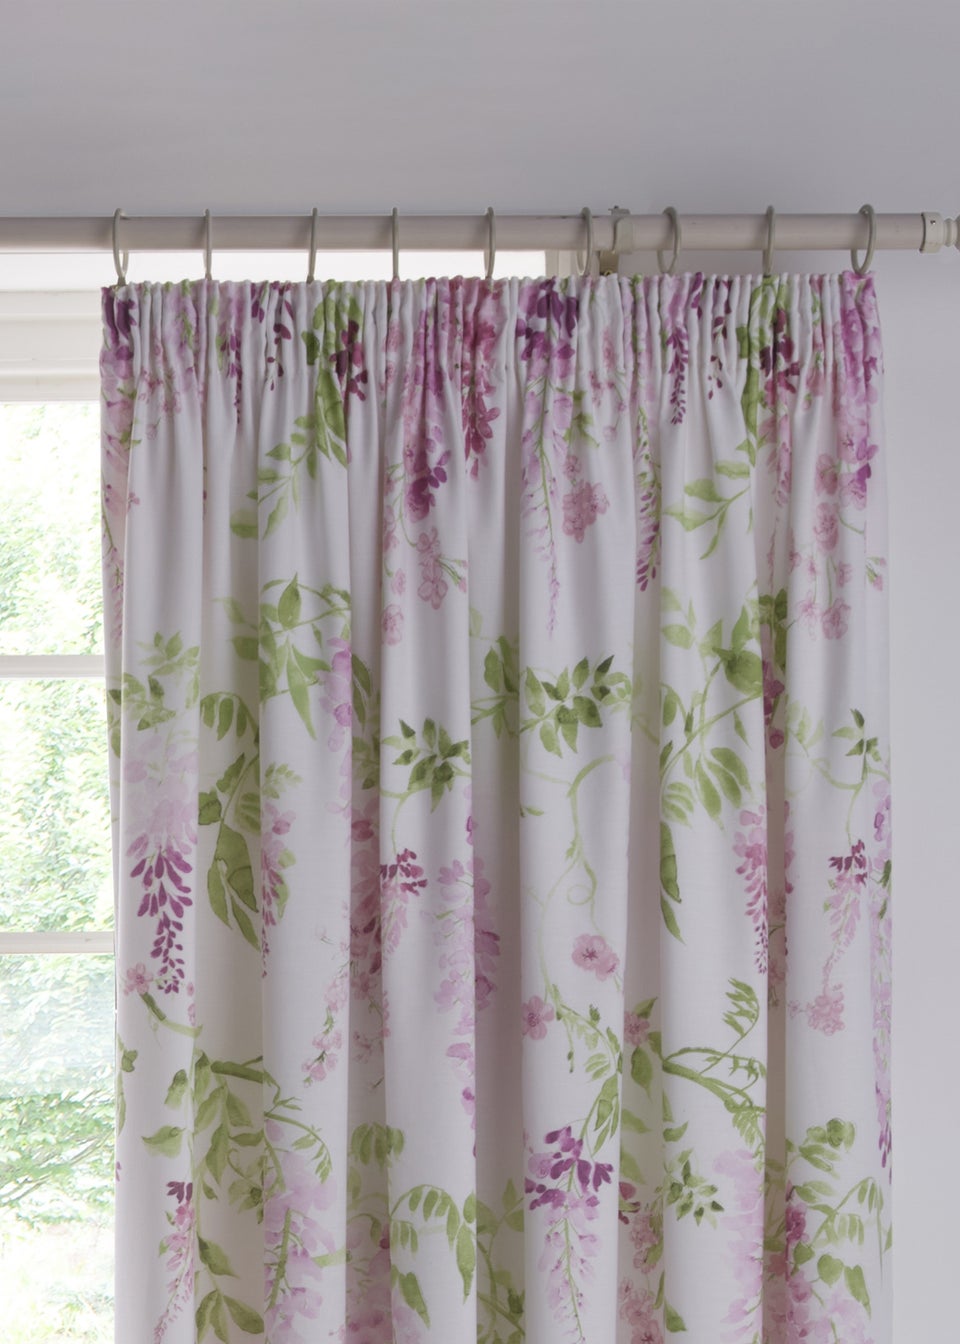 Dreams & Drapes Wisteria Pink Pencil Pleat Curtains With Tie-Backs